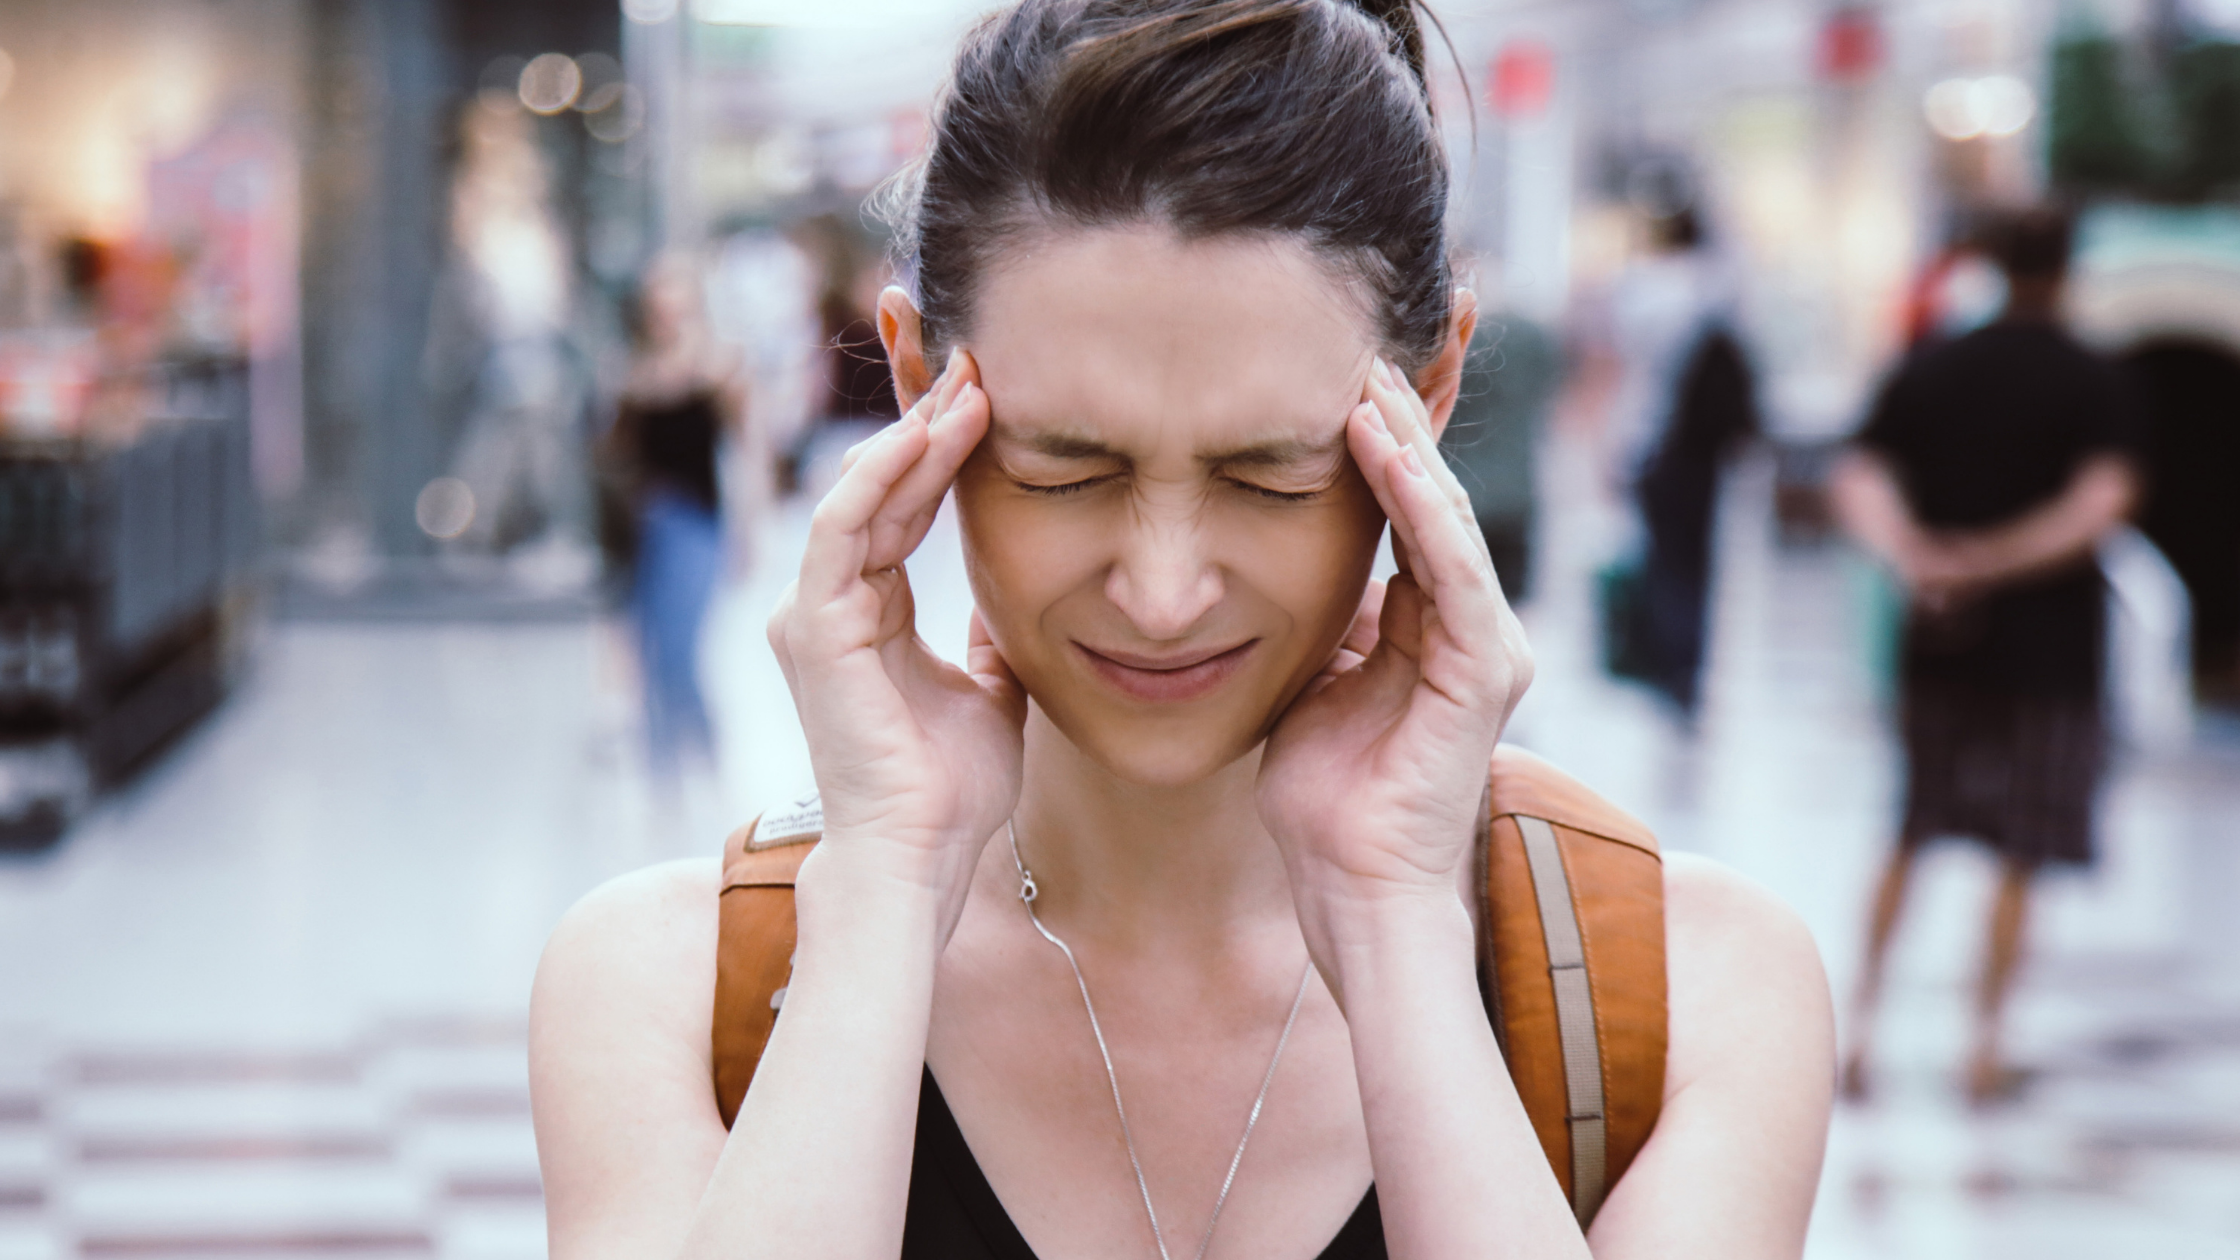 how to stop a panic attacks in public?